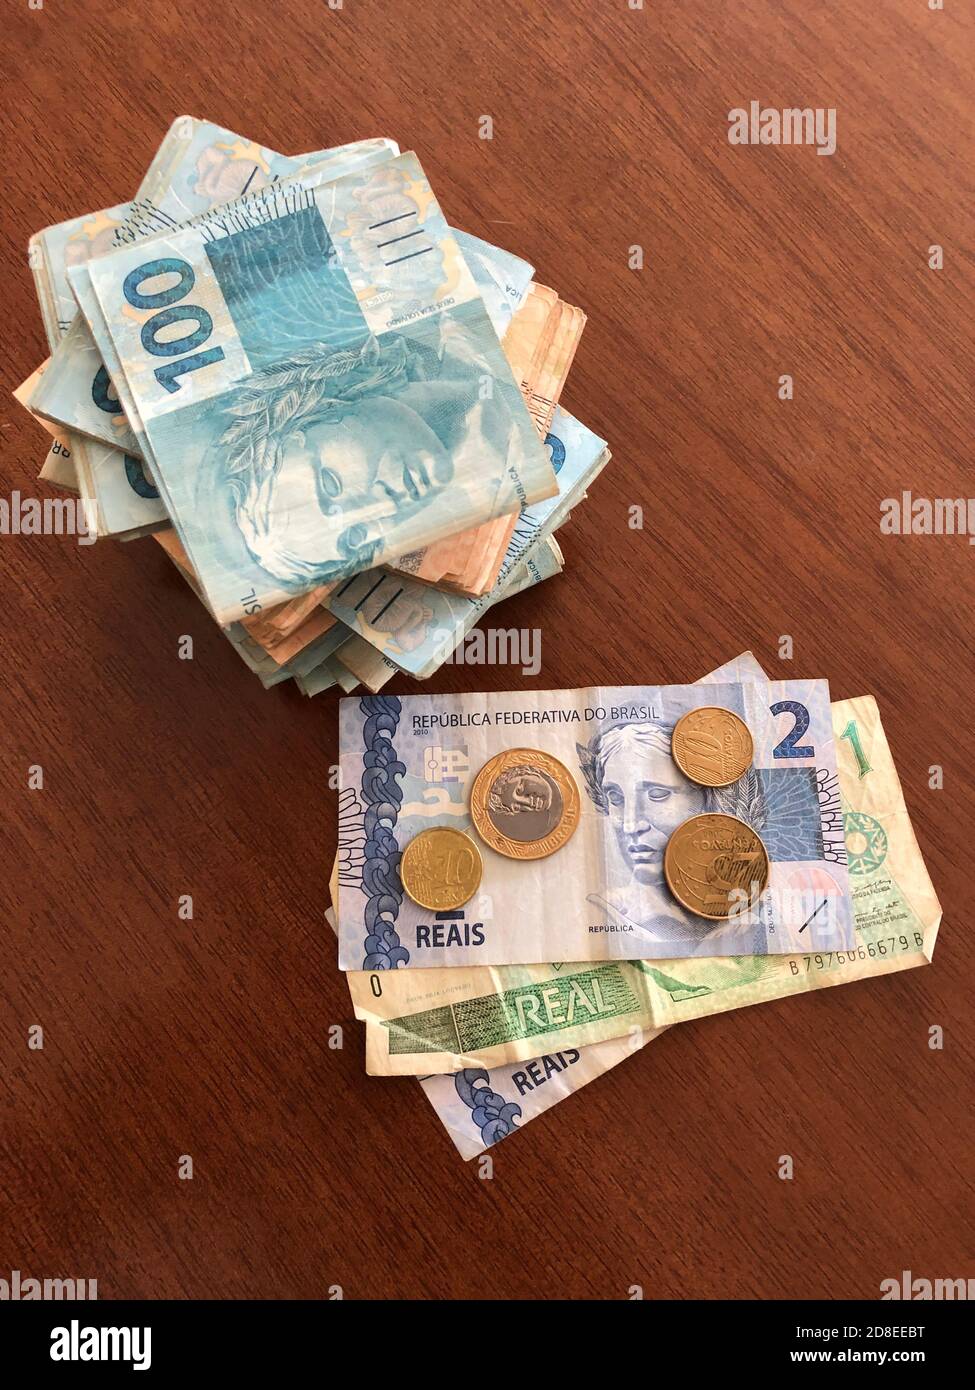 Real Brazilian banknotes. A lot of real Brazilian currency. Stock Photo